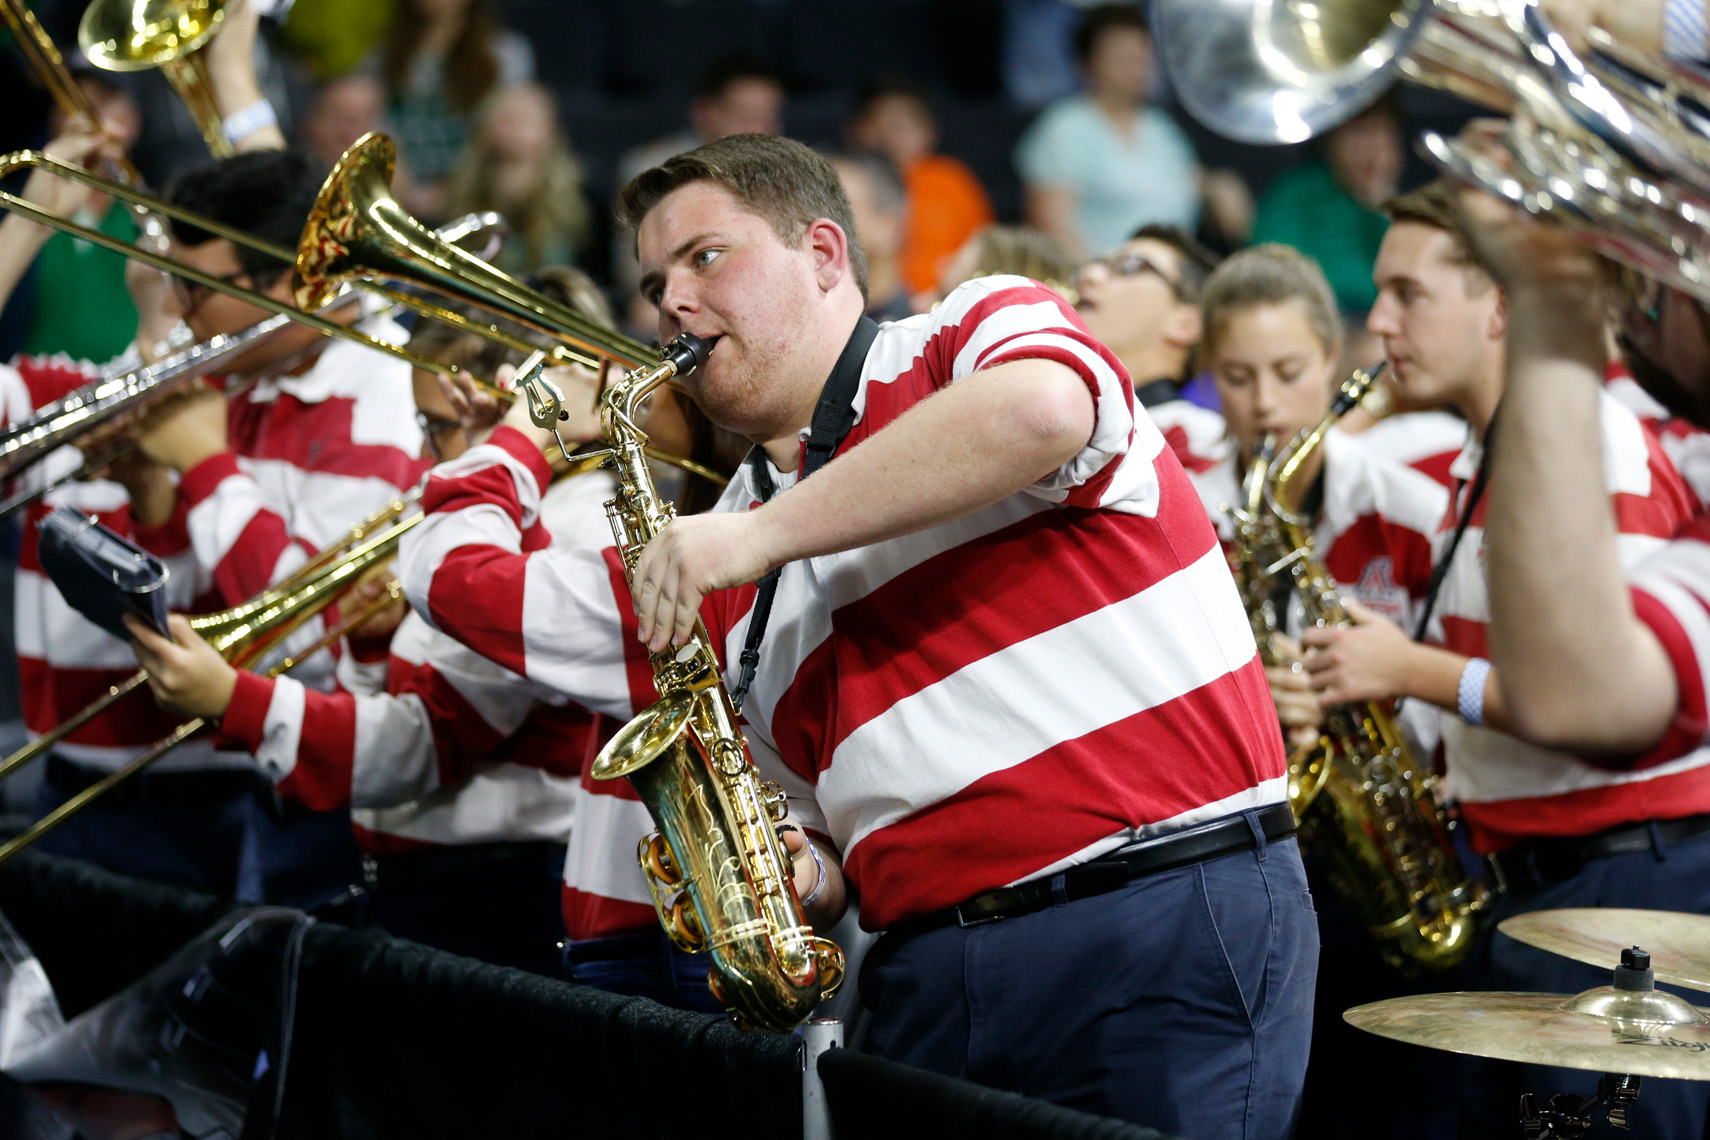 A  striped shirt saxophone player leads the  Arizona pep band during a NCAA game.